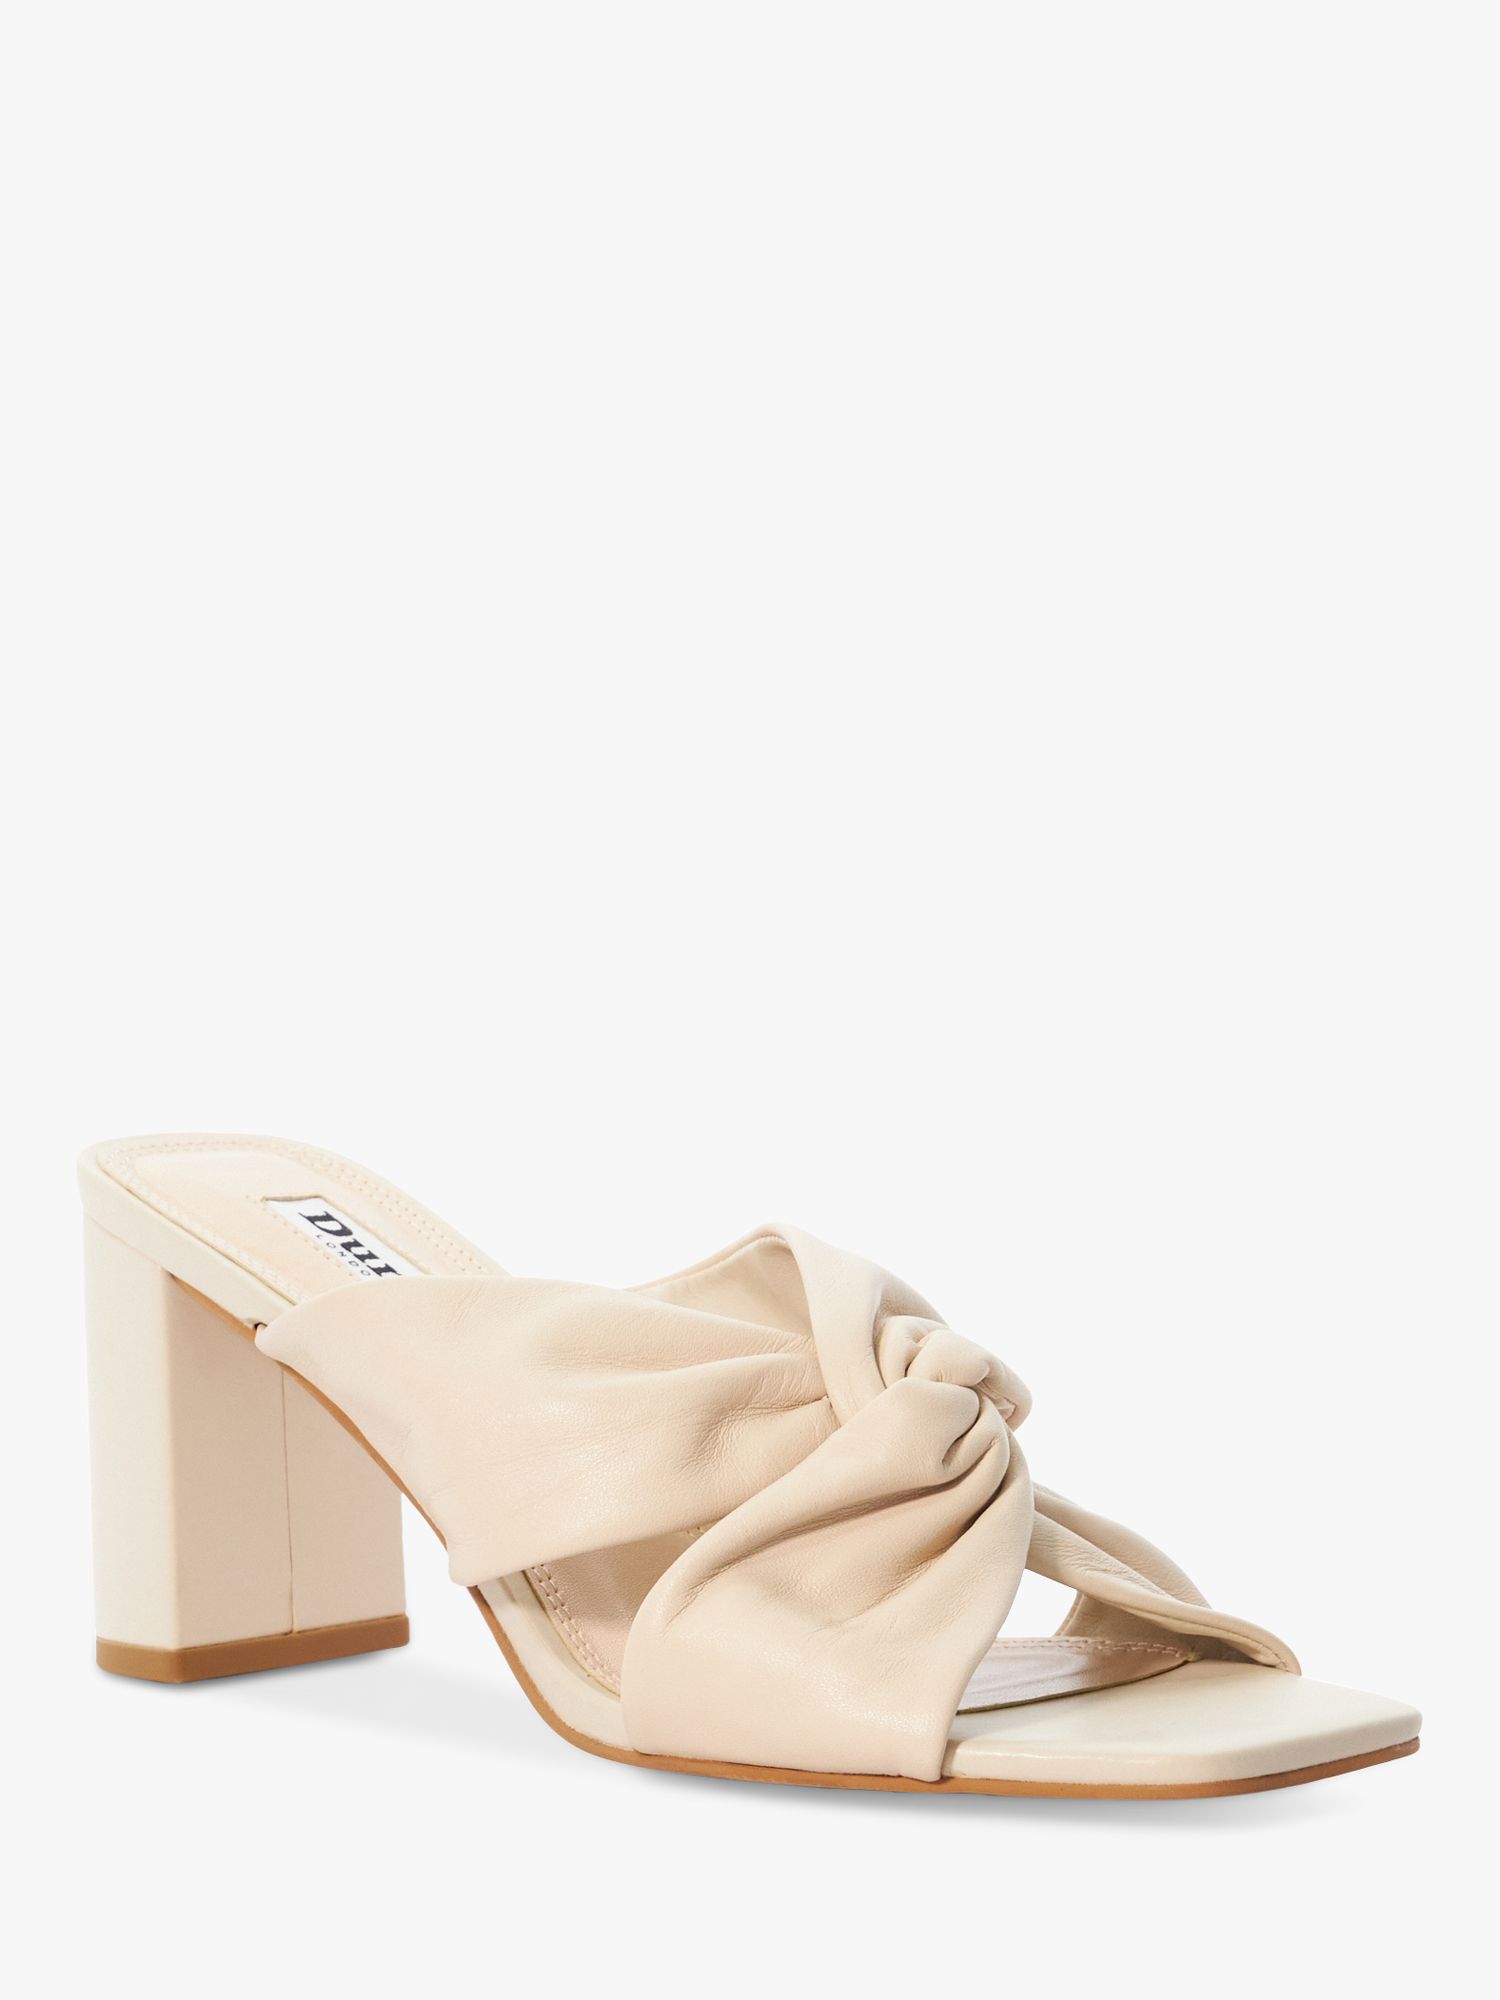 Buy Dune Wide Fit Maizing Soft Leather Twist Strap Mules, Cream Online at johnlewis.com